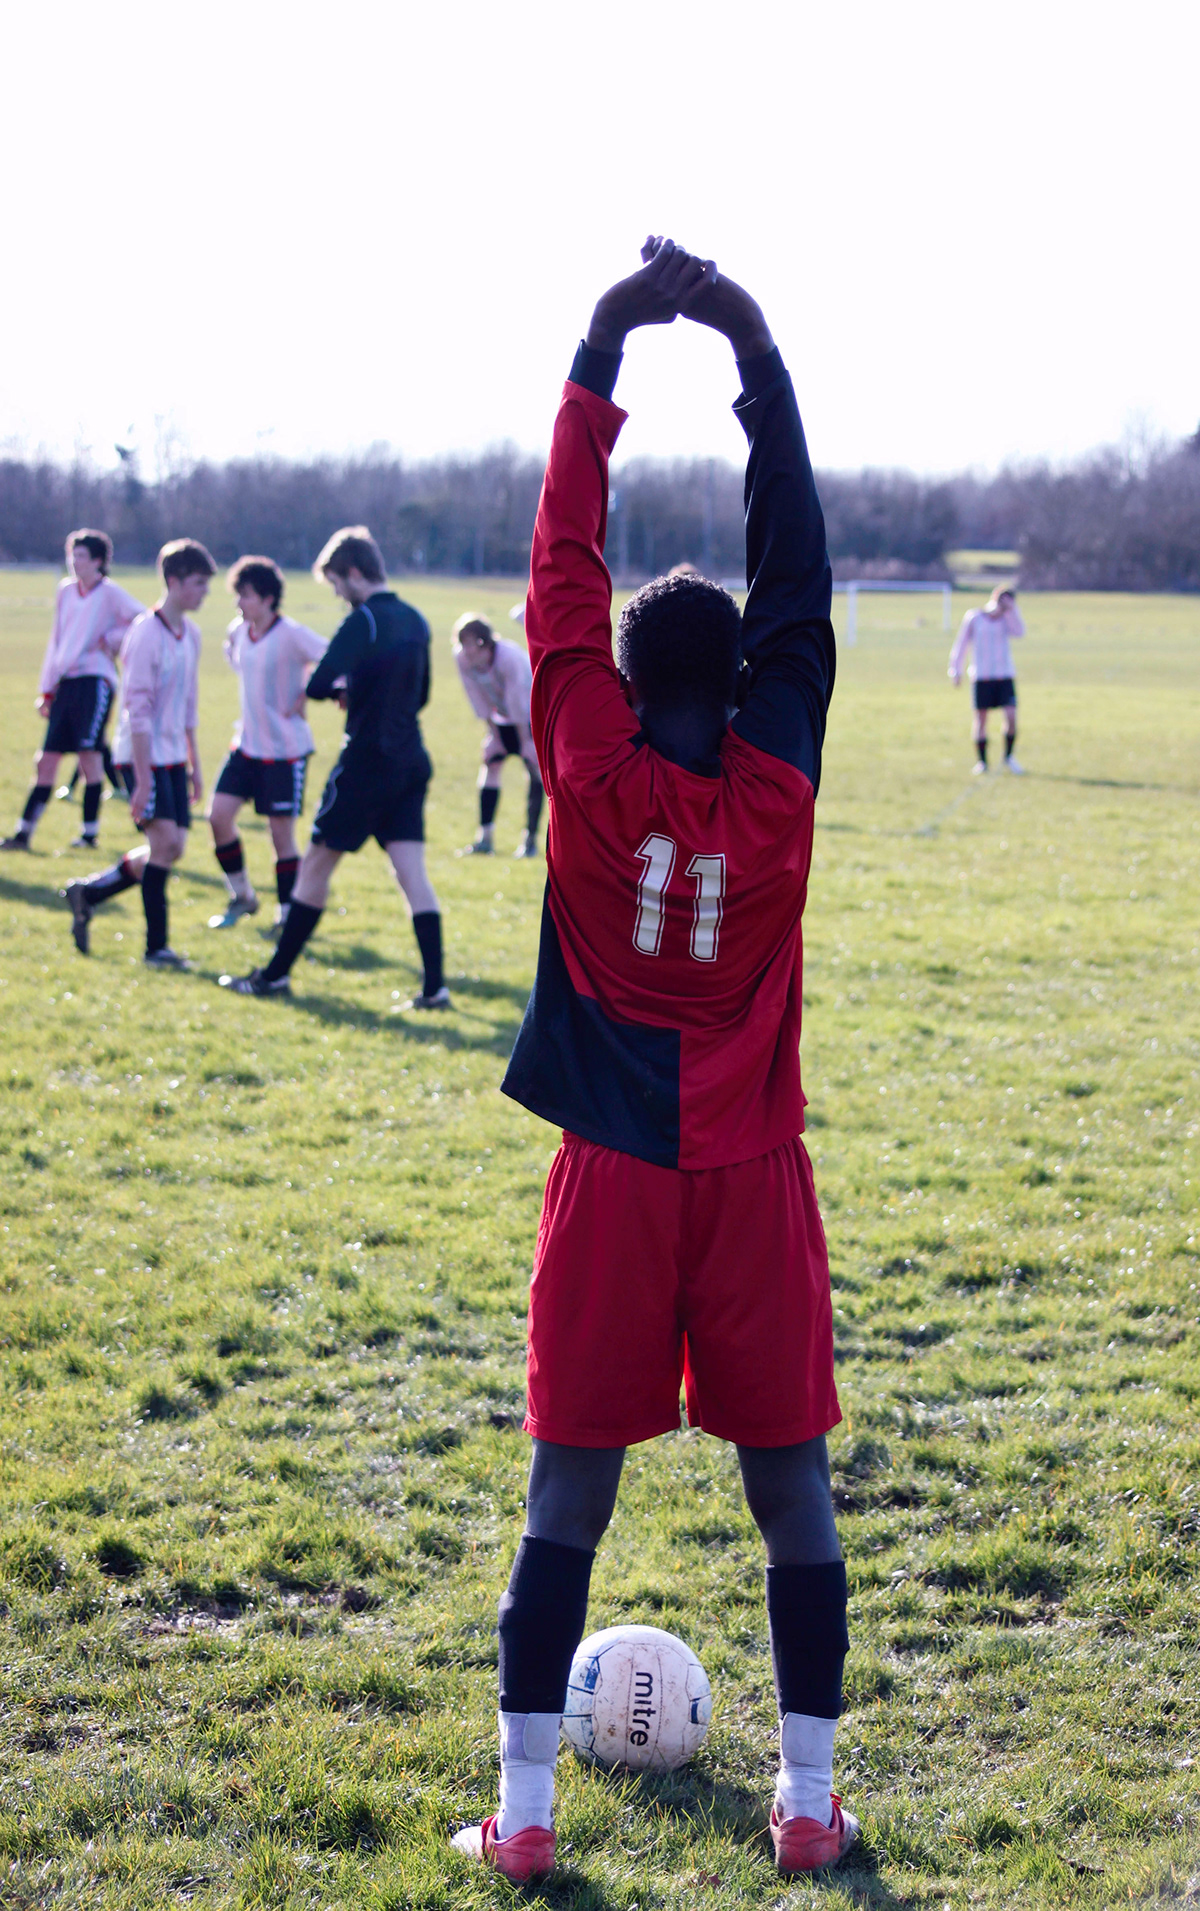 football grassroots editorial youth england